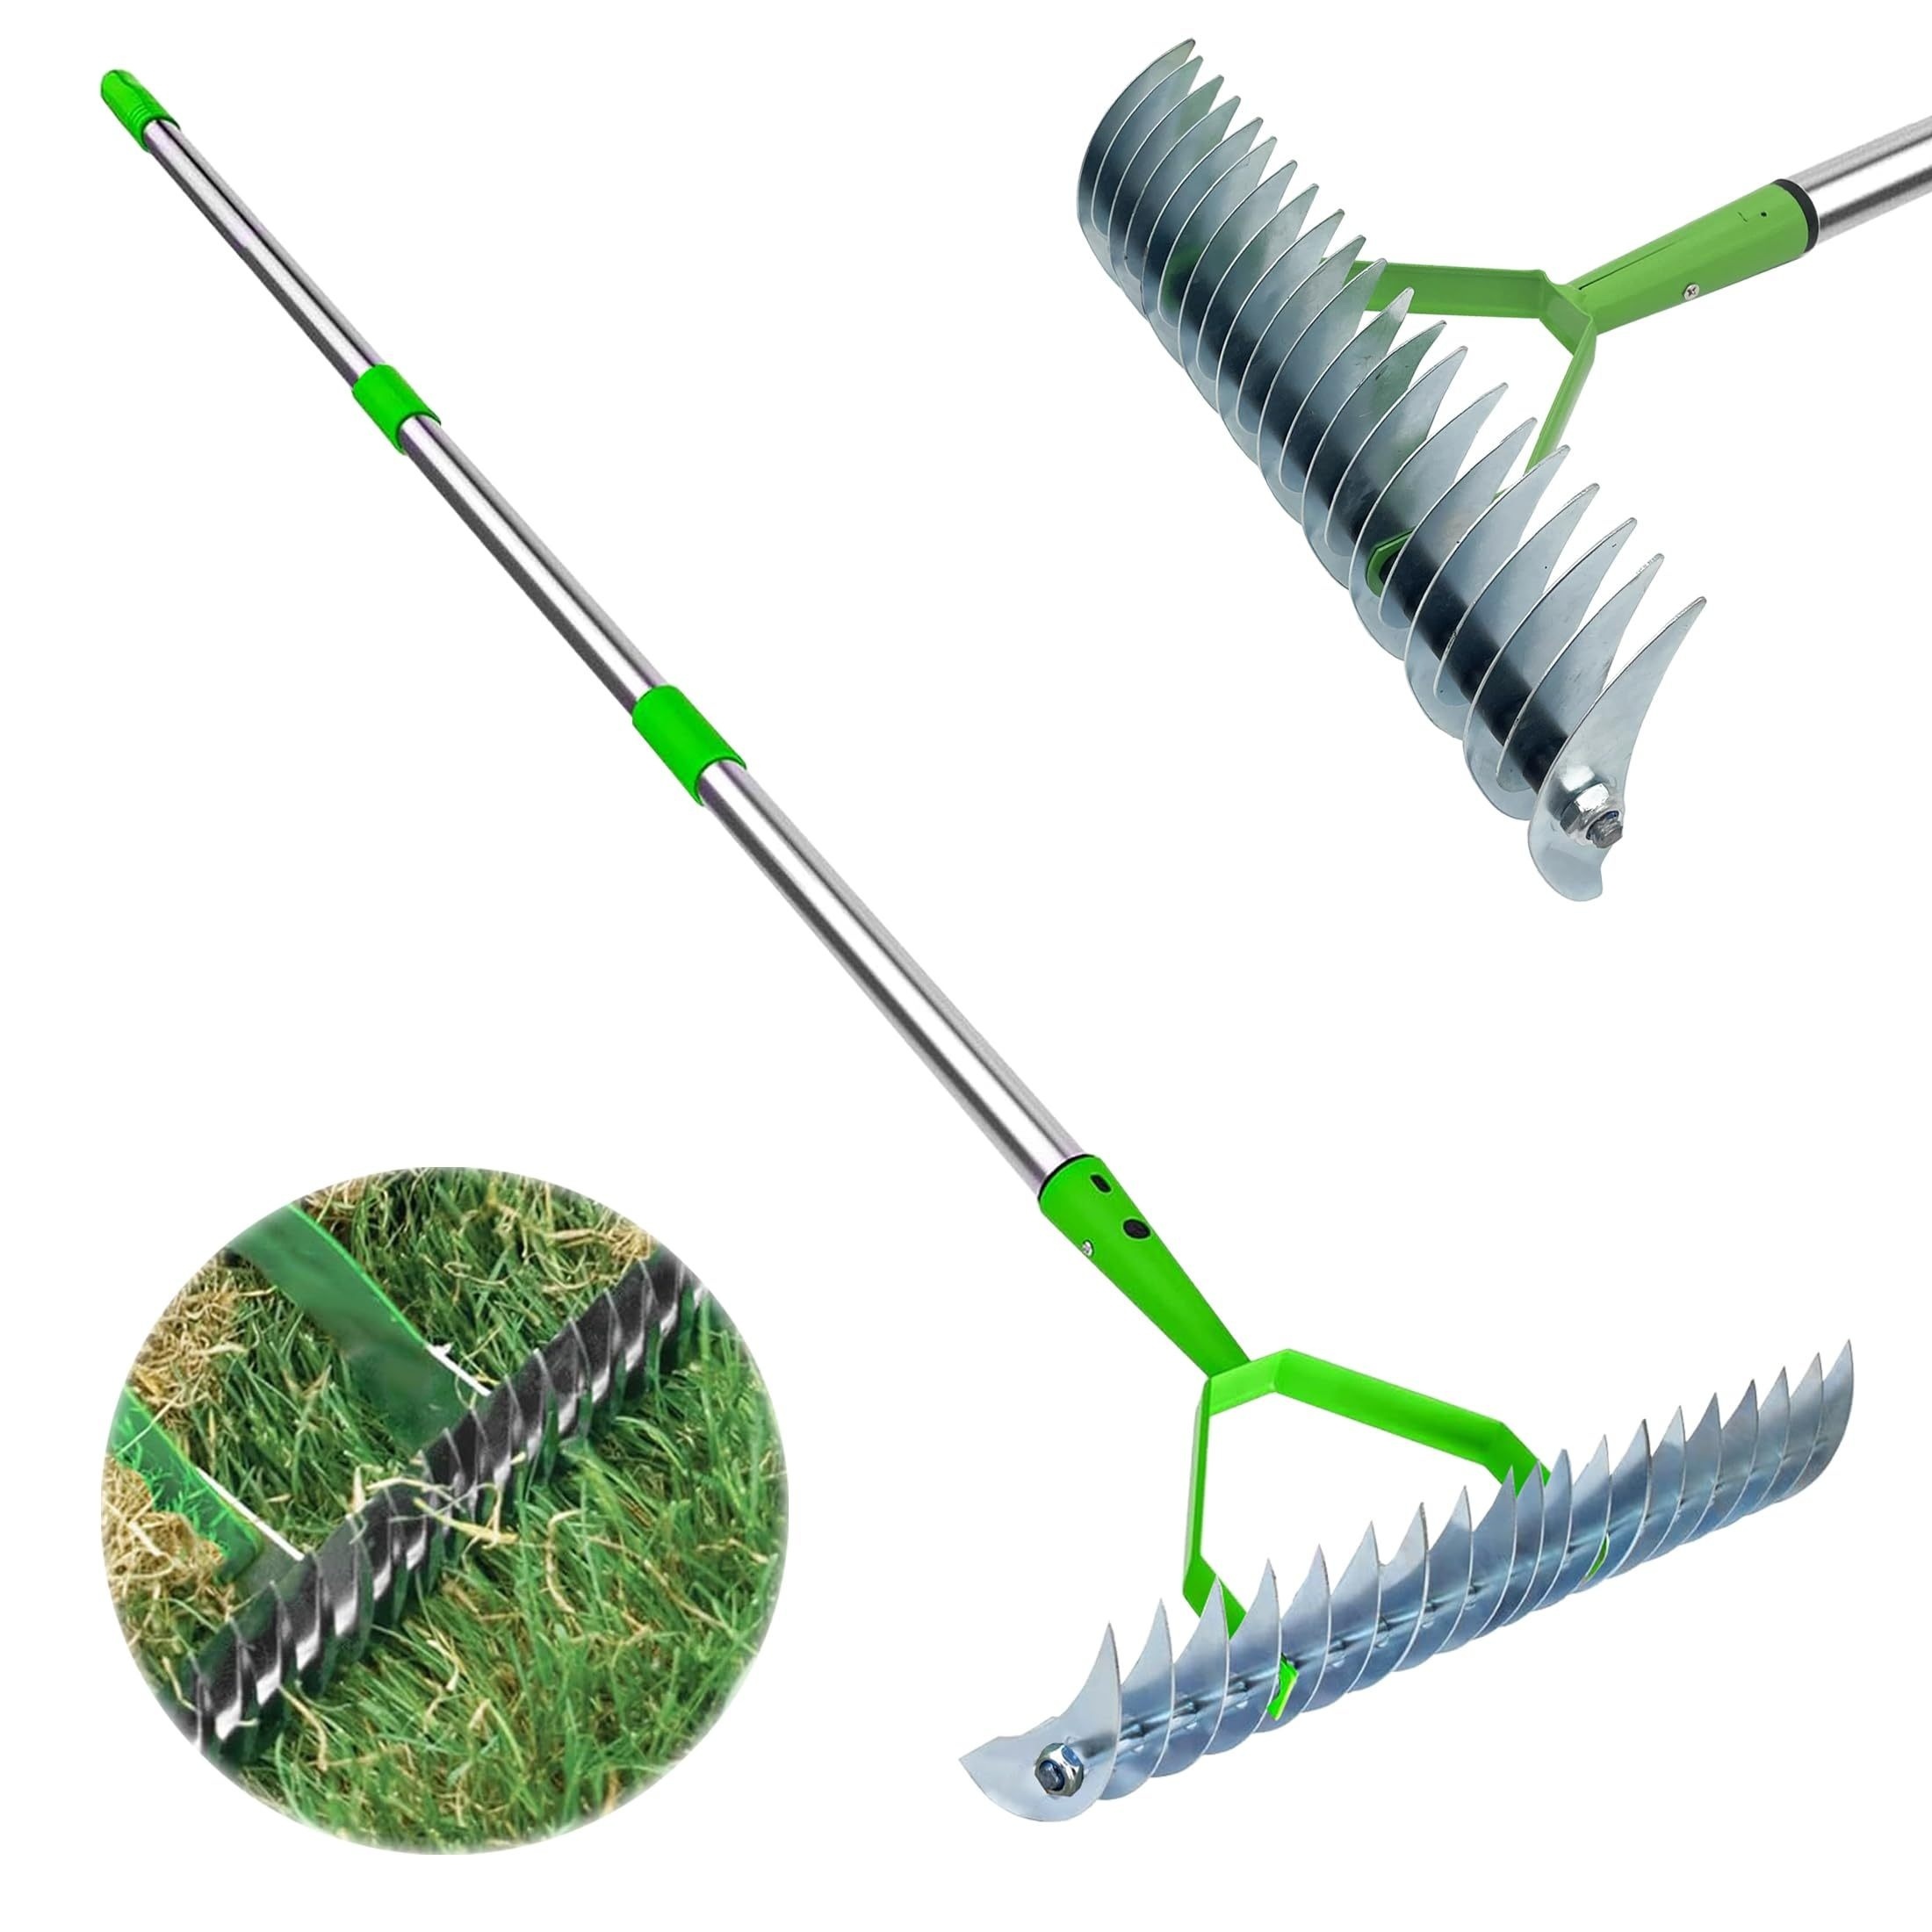 

1pc Heavy-duty Metal Thatch Rake - 12.8" Wide Dethatcher For Efficient Lawn Cleaning, Stainless Steel Handle, Soil Loosening Garden Tool, 52.8" Length (green)